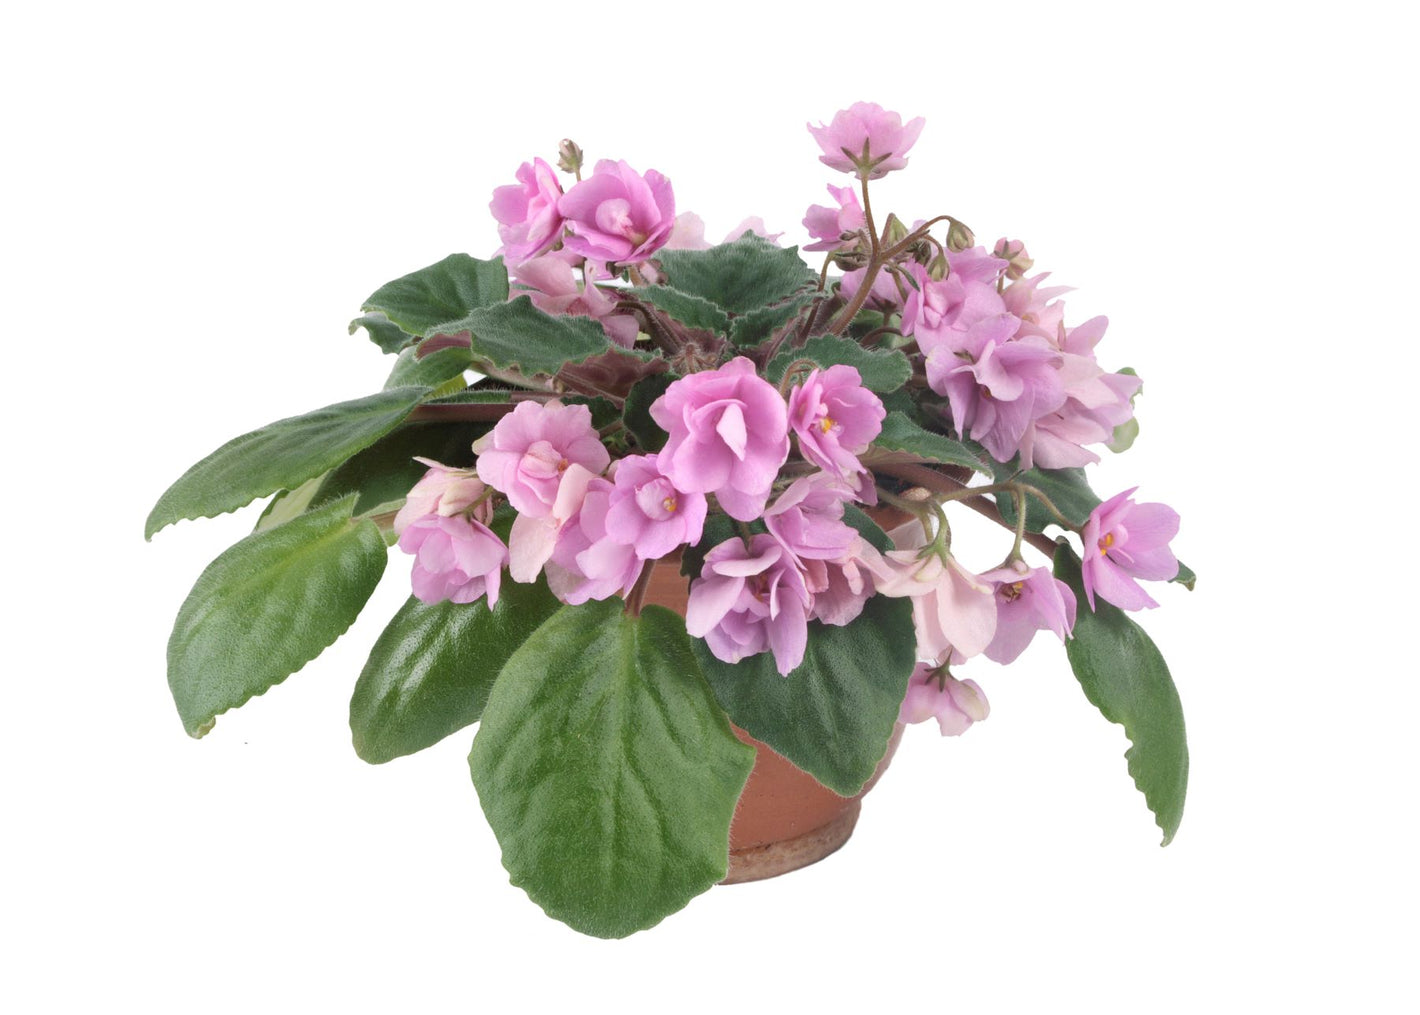 The image features a drooping pink African violet with many clustered blooms.